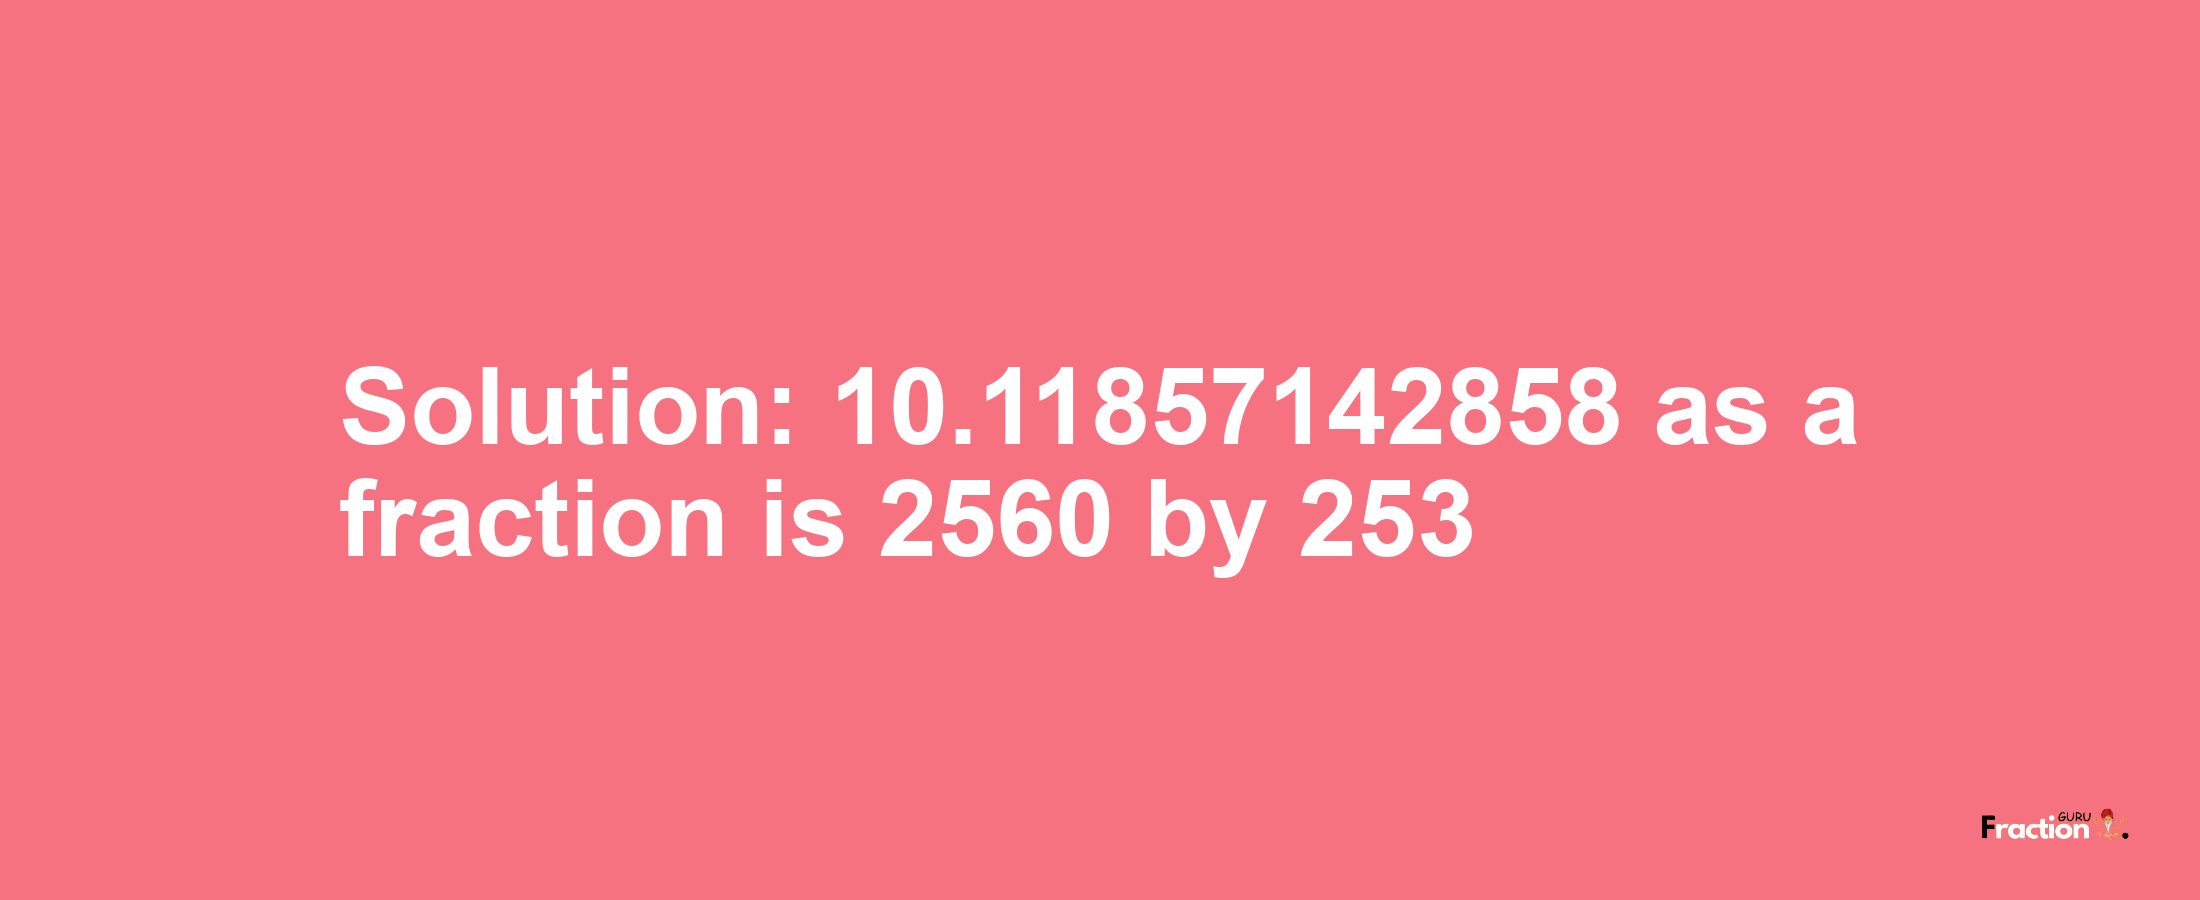 Solution:10.11857142858 as a fraction is 2560/253